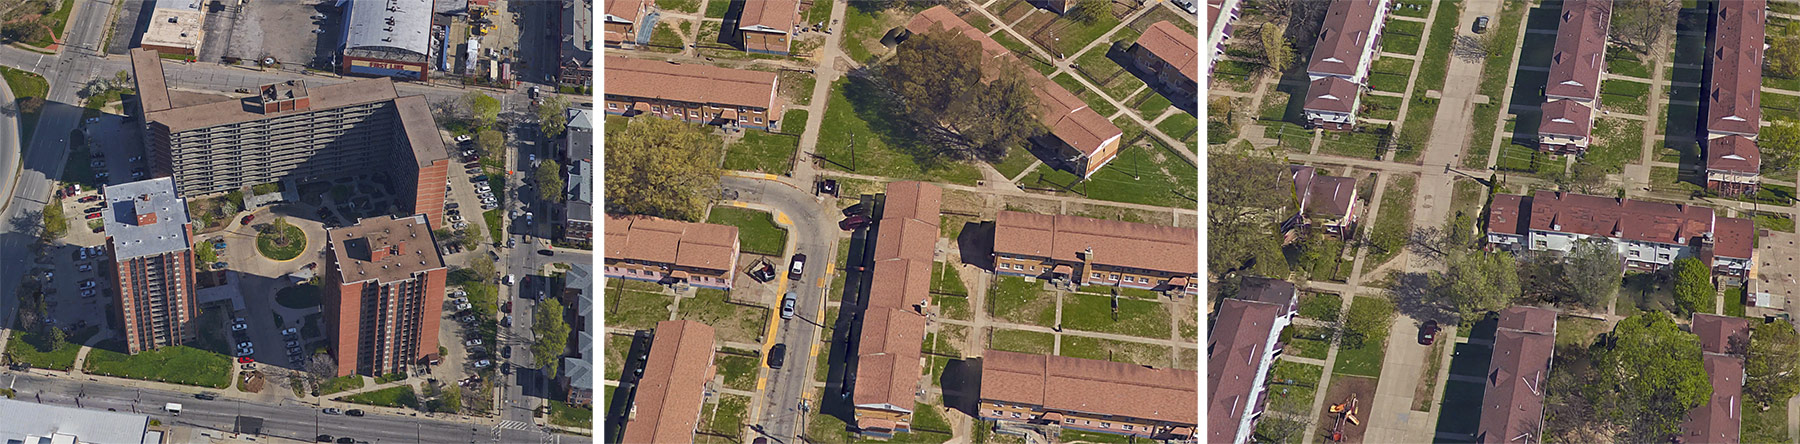 Left to right: Dosker Manor; Parkway Village; Beecher Terrace. (Courtesy Google)